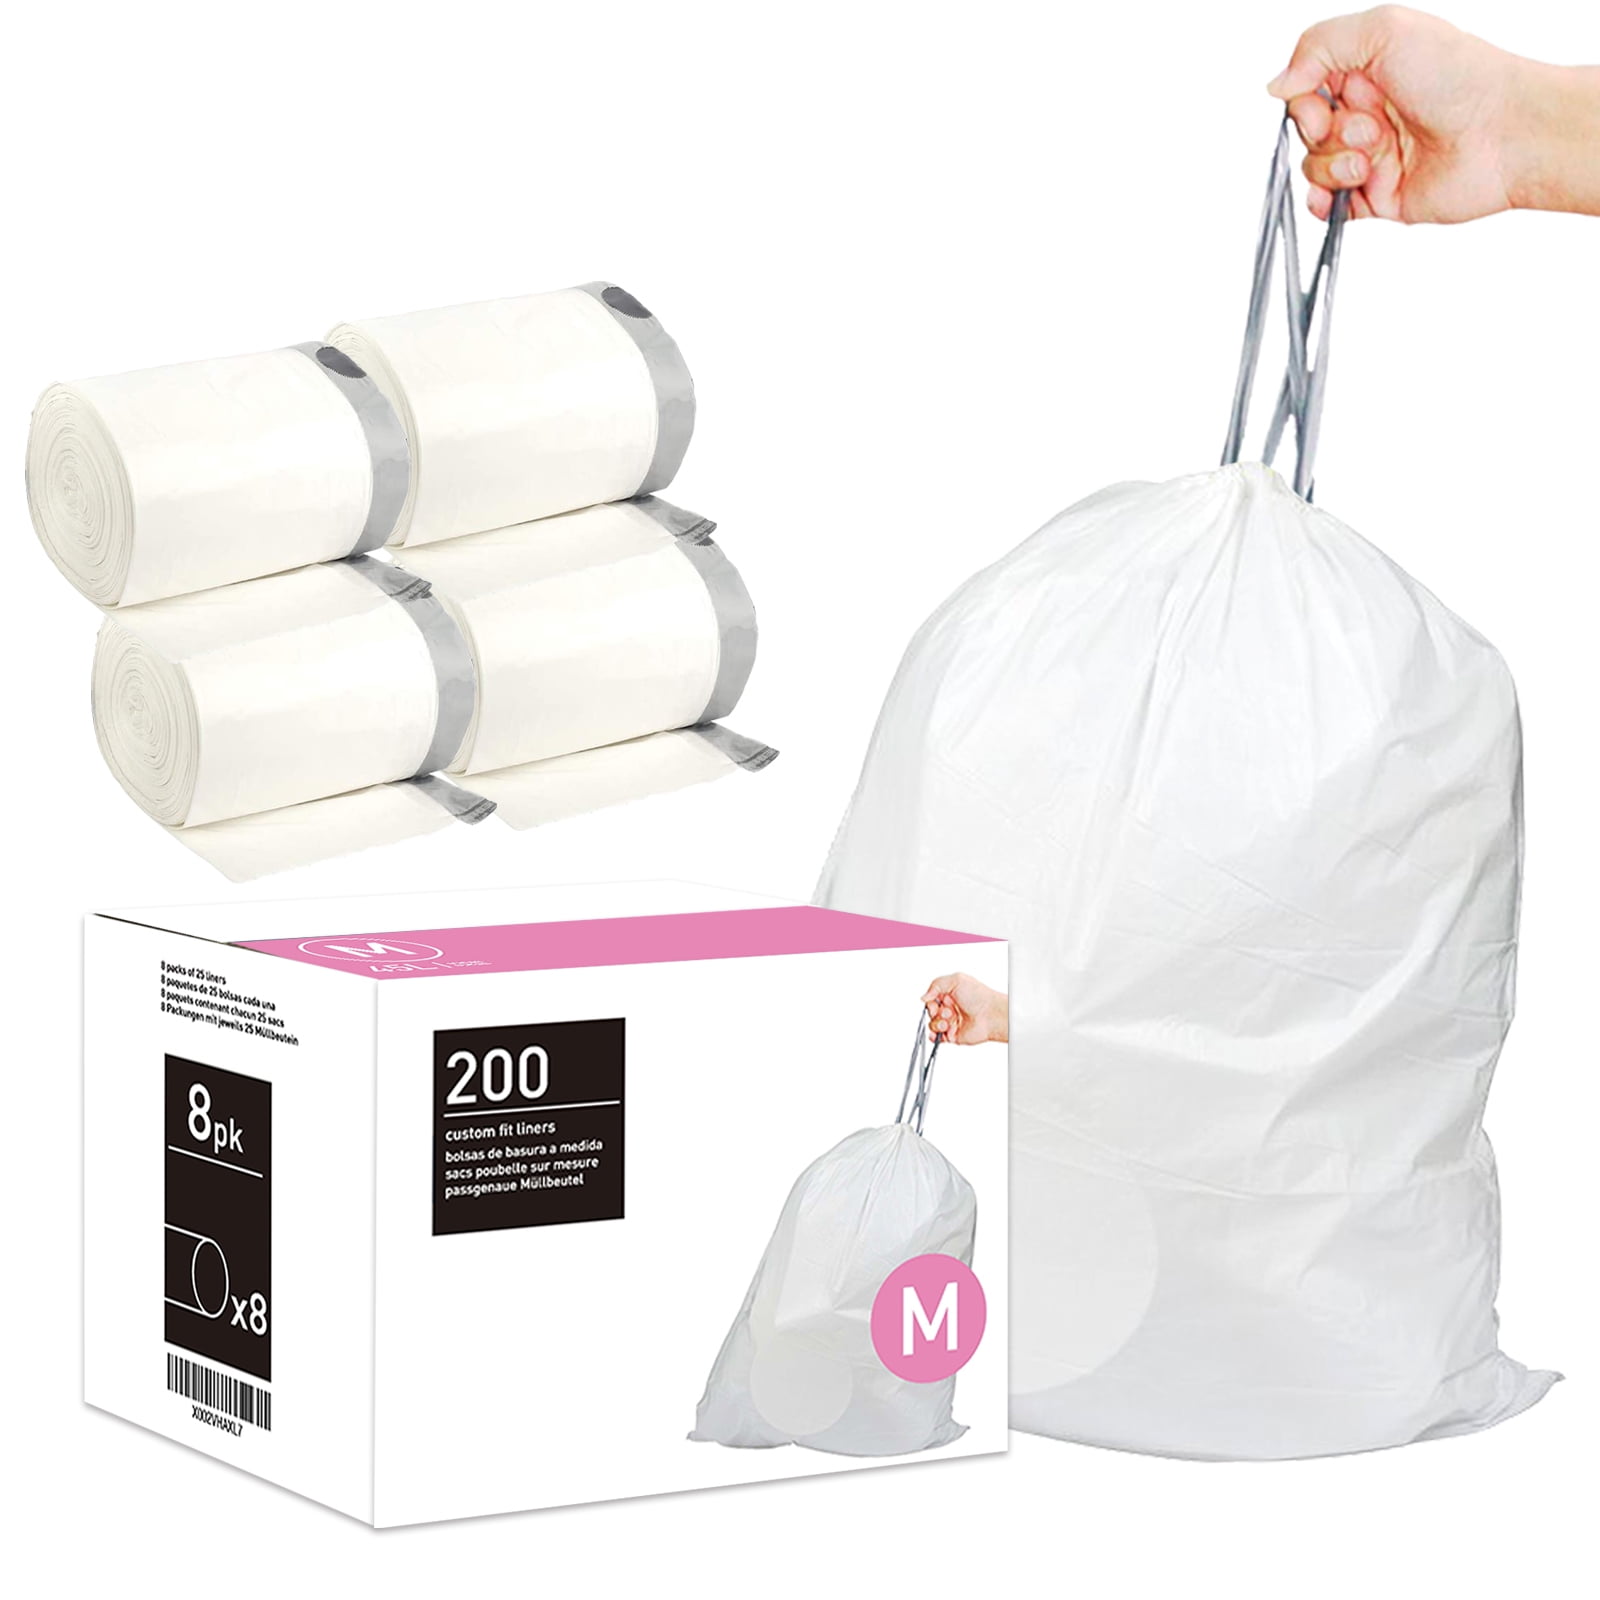 4 PACK simplehuman Code M 45 L Trash Bags 80 Liners Total White Extra Strong